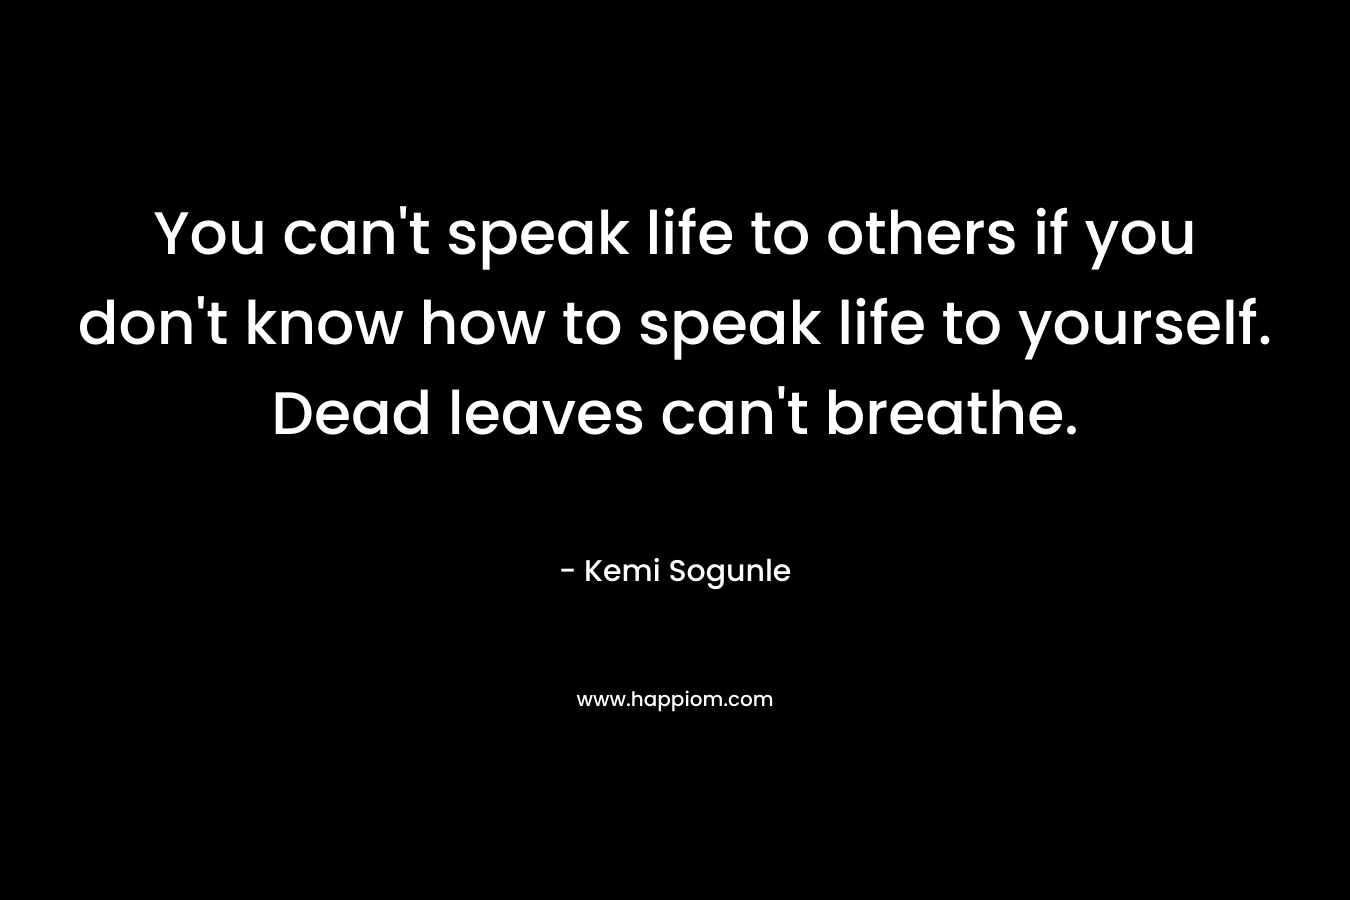 You can't speak life to others if you don't know how to speak life to yourself. Dead leaves can't breathe.